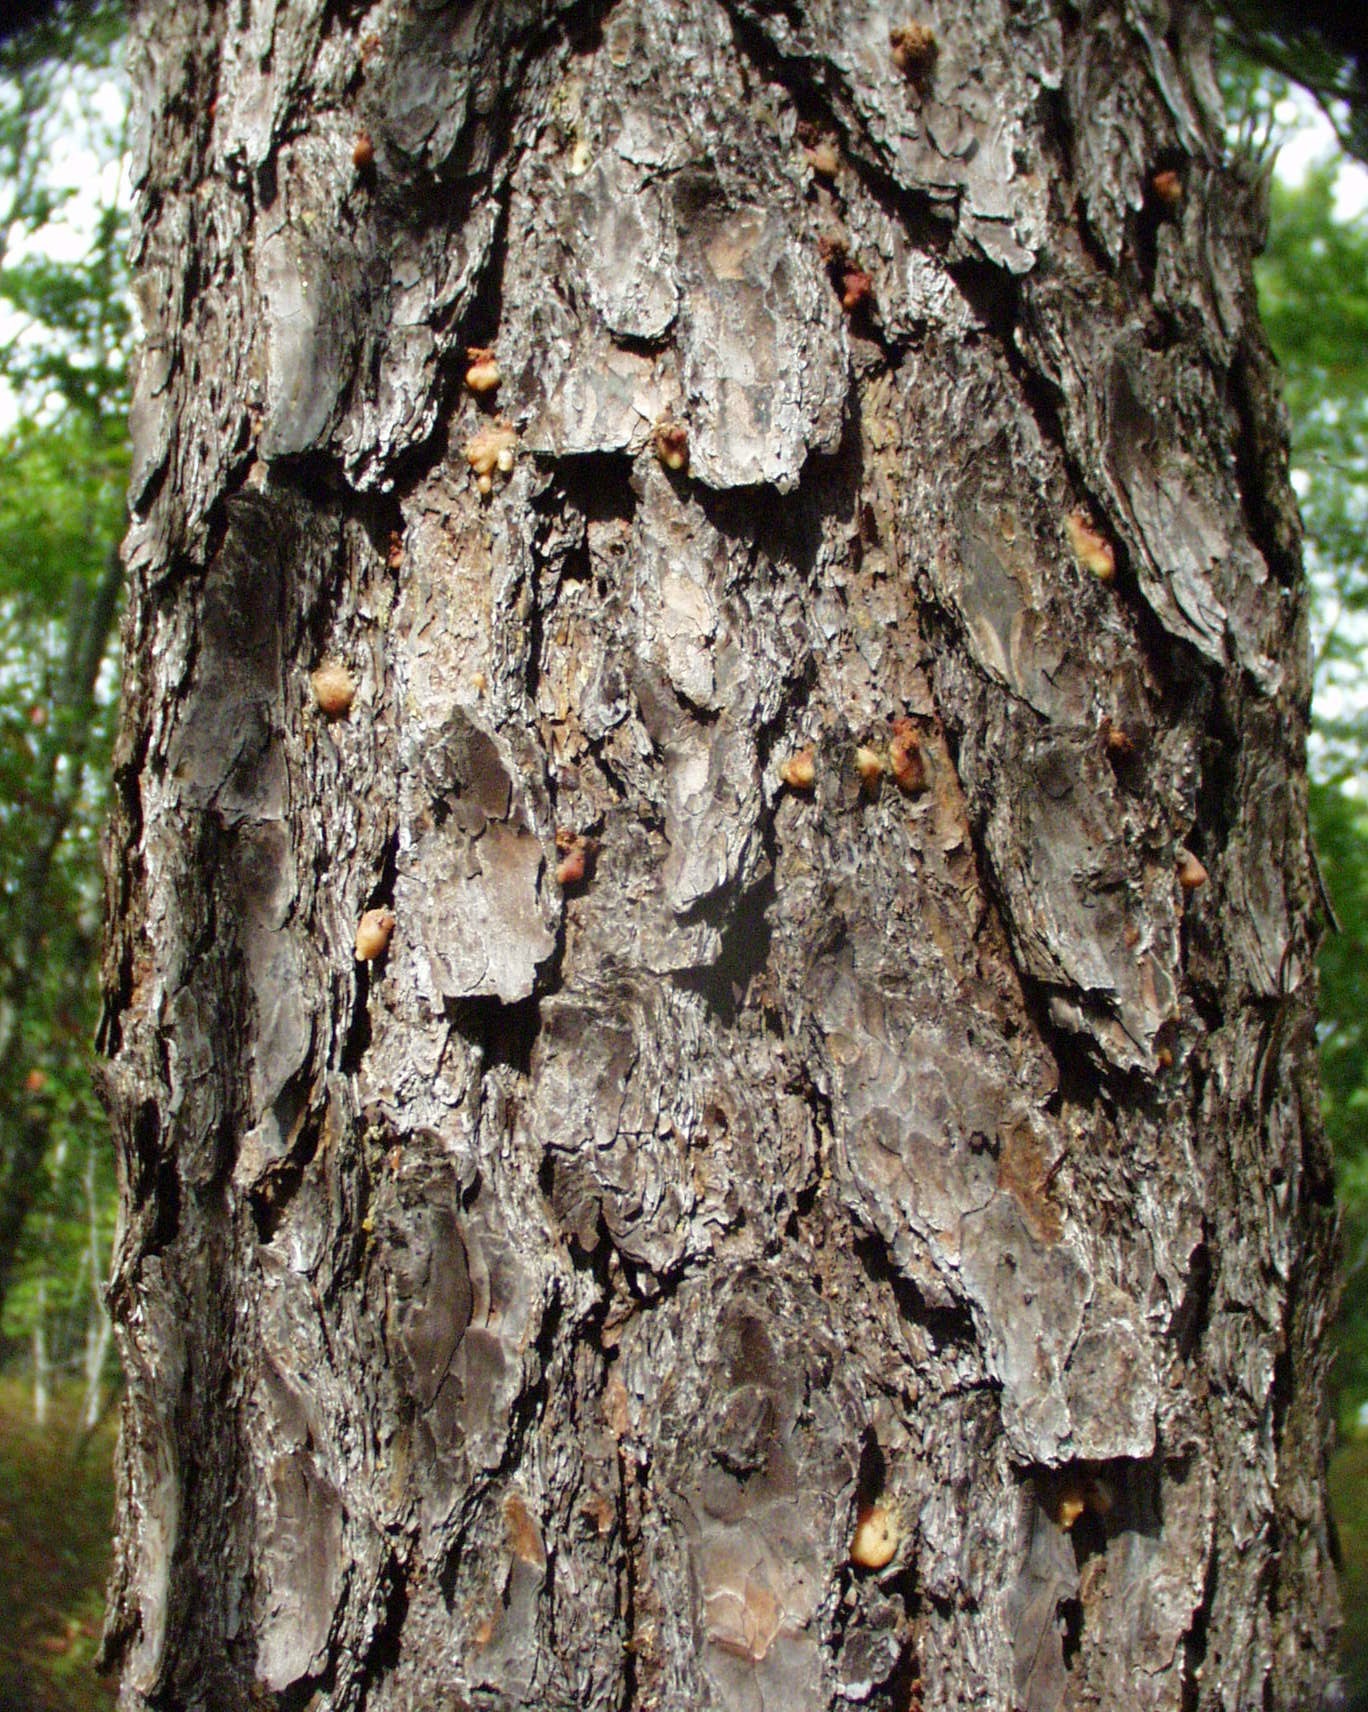 Southern pine beetle larve on the bark of pitch pine.   VICTORIA BUSTAMANTE